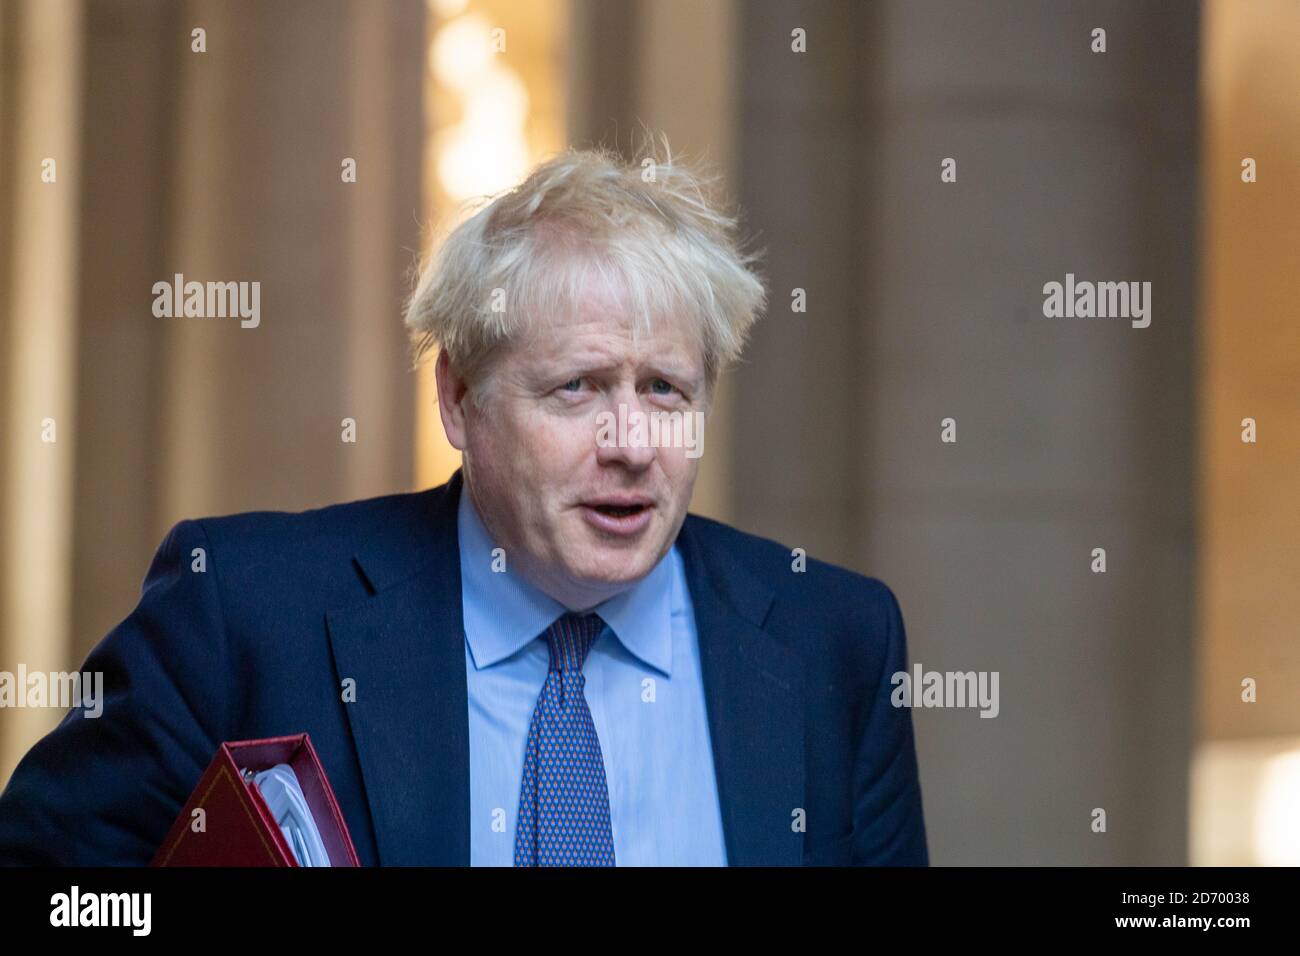 London, UK. 20th Oct, 2020. Boris Johnson, MP Prime Minister leave a cabinet meeting at the Foreign and Commonwealth Office London. Credit: Ian Davidson/Alamy Live News Stock Photo